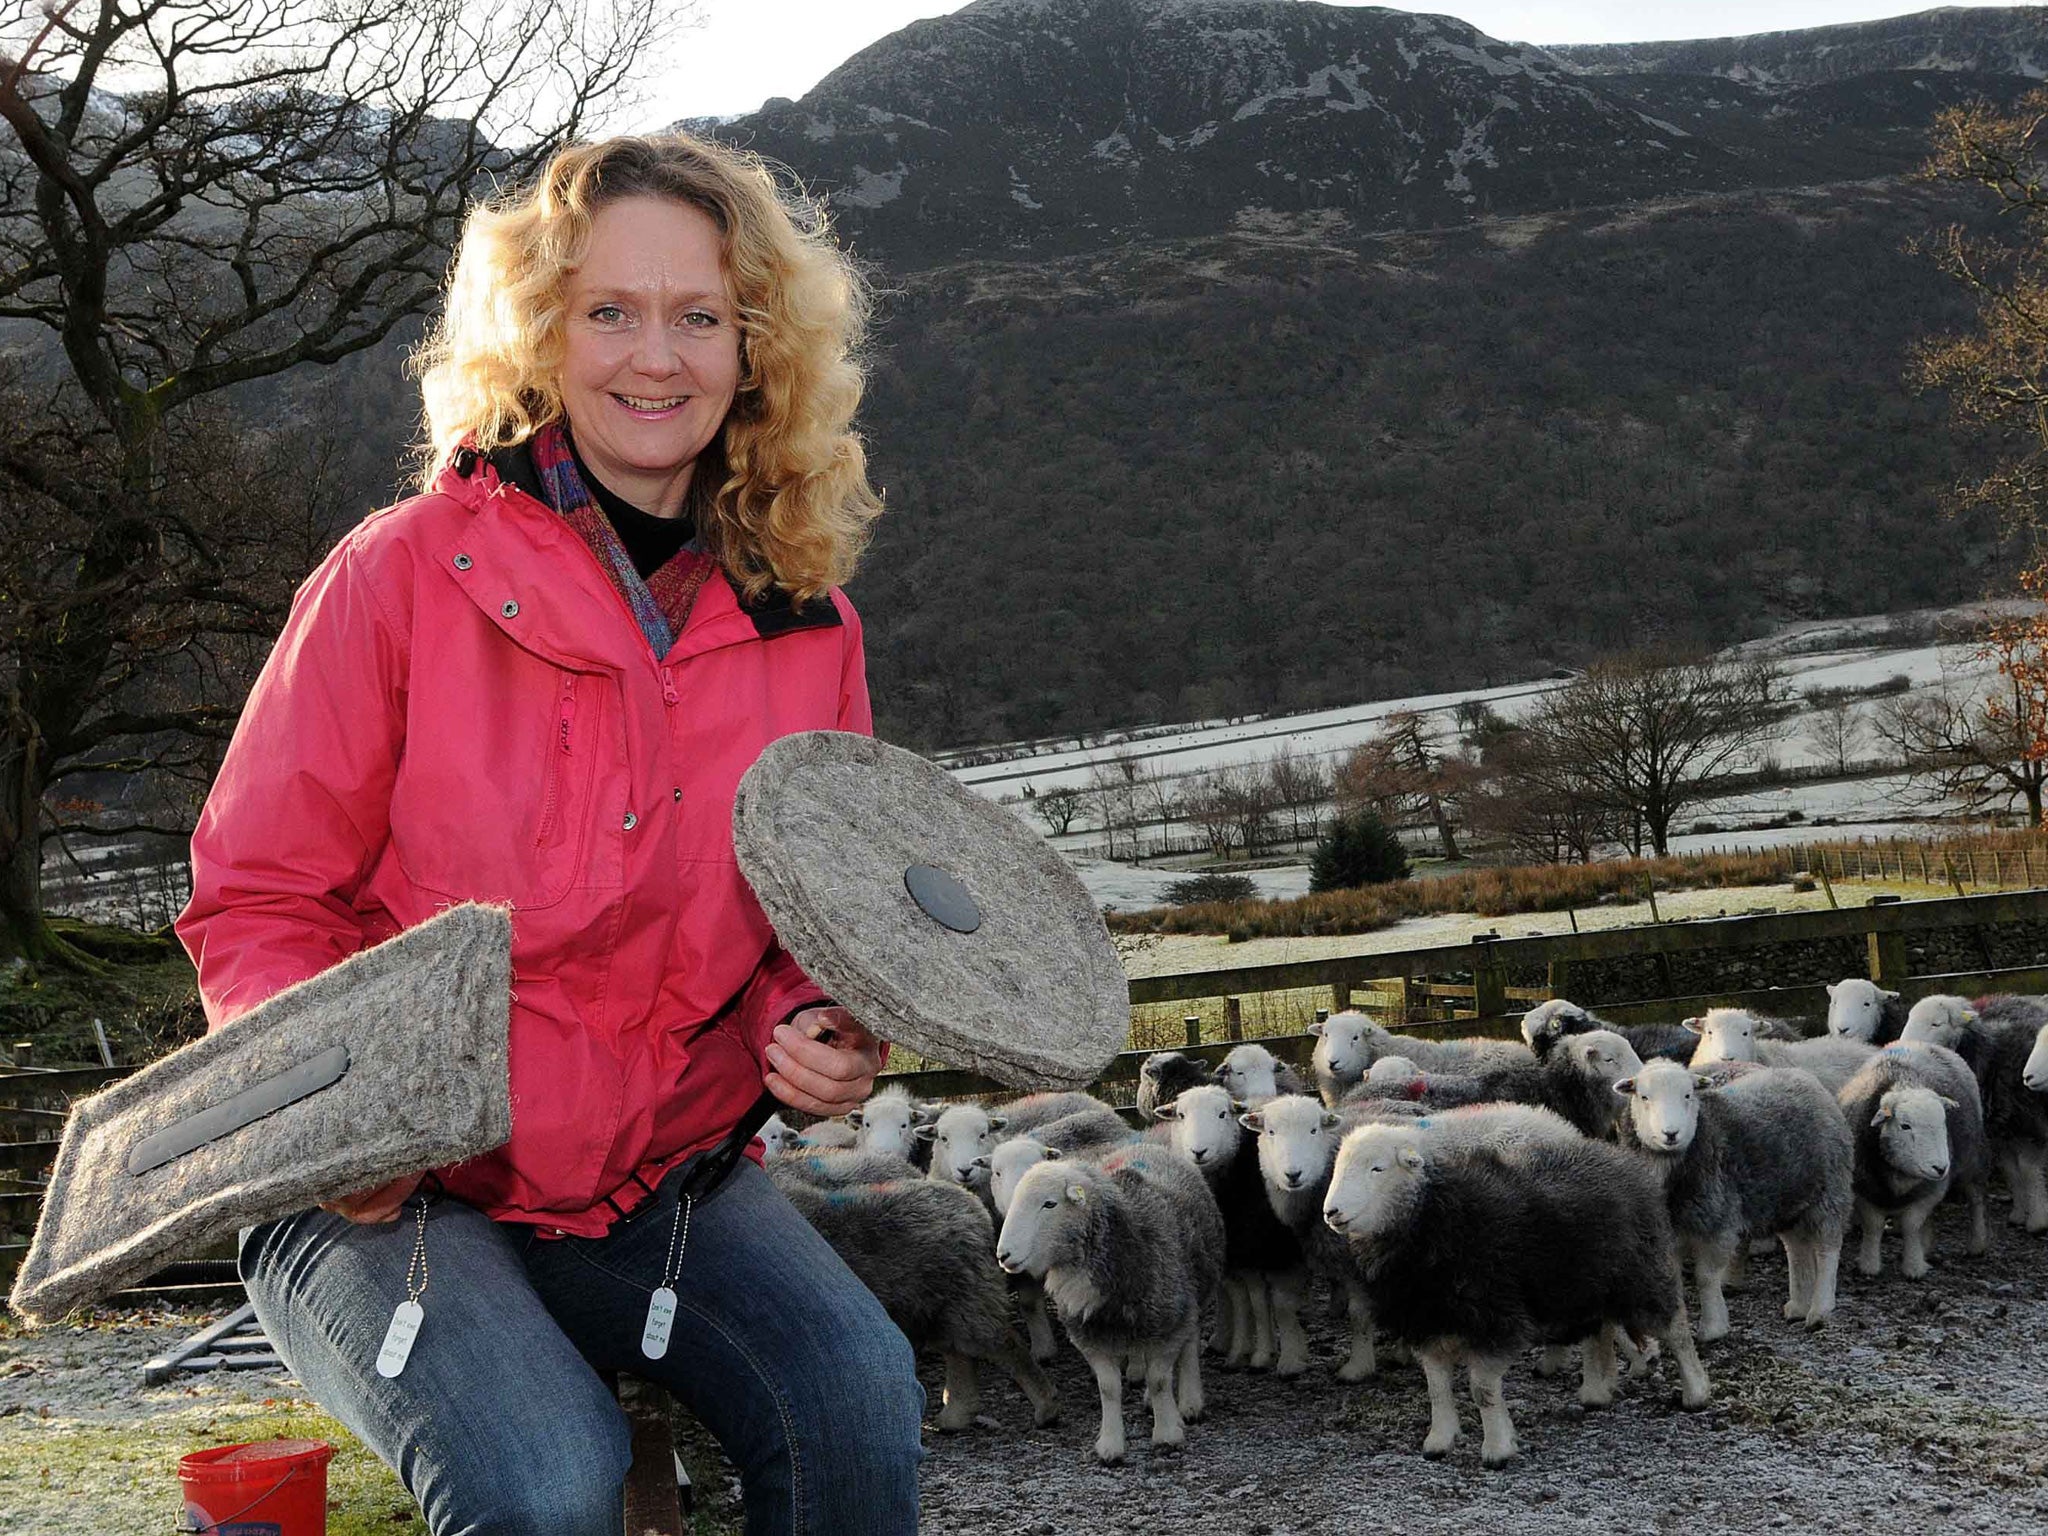 Sally Philips is the founder of Chimney Sheep